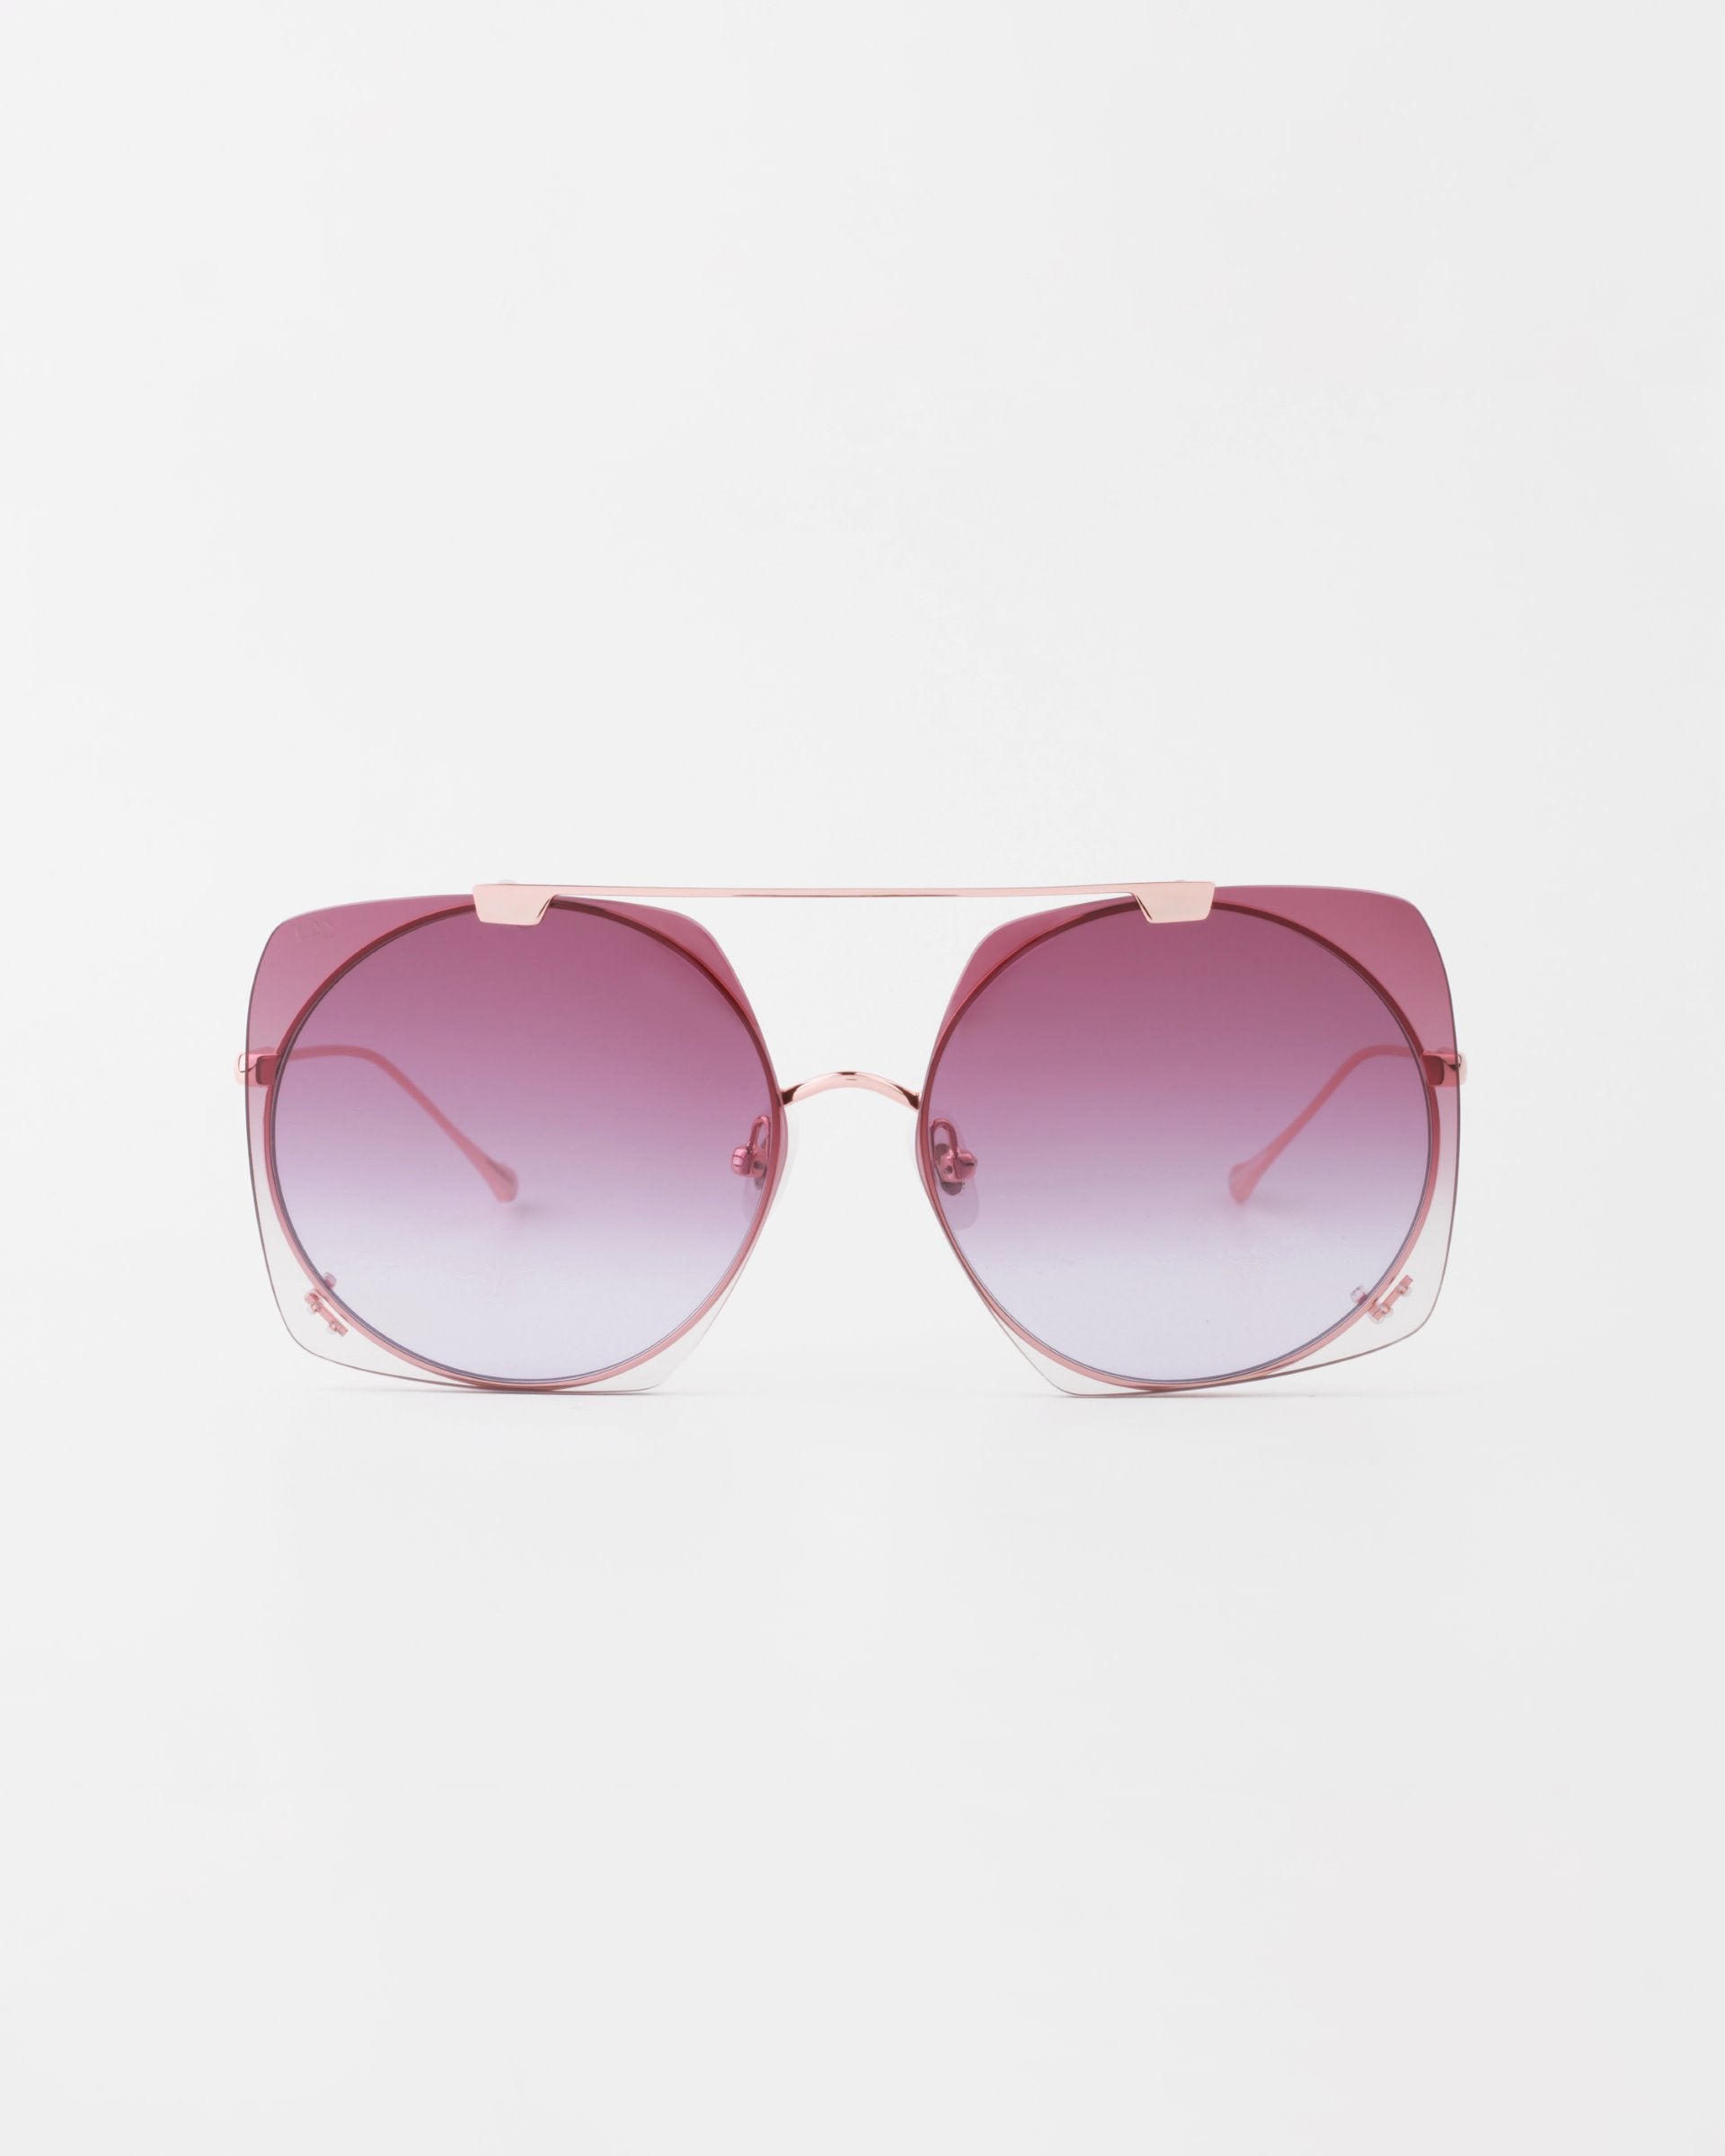 A pair of oversized, square sunglasses with a thin, 18-karat gold-plated frame. The lenses are gradient, shading from a dark pink at the top to a lighter pink at the bottom. The slim temples feature a subtle curve. These UVA & UVB-protected shades, For Art's Sake® Last Summer, are set against a plain white background.